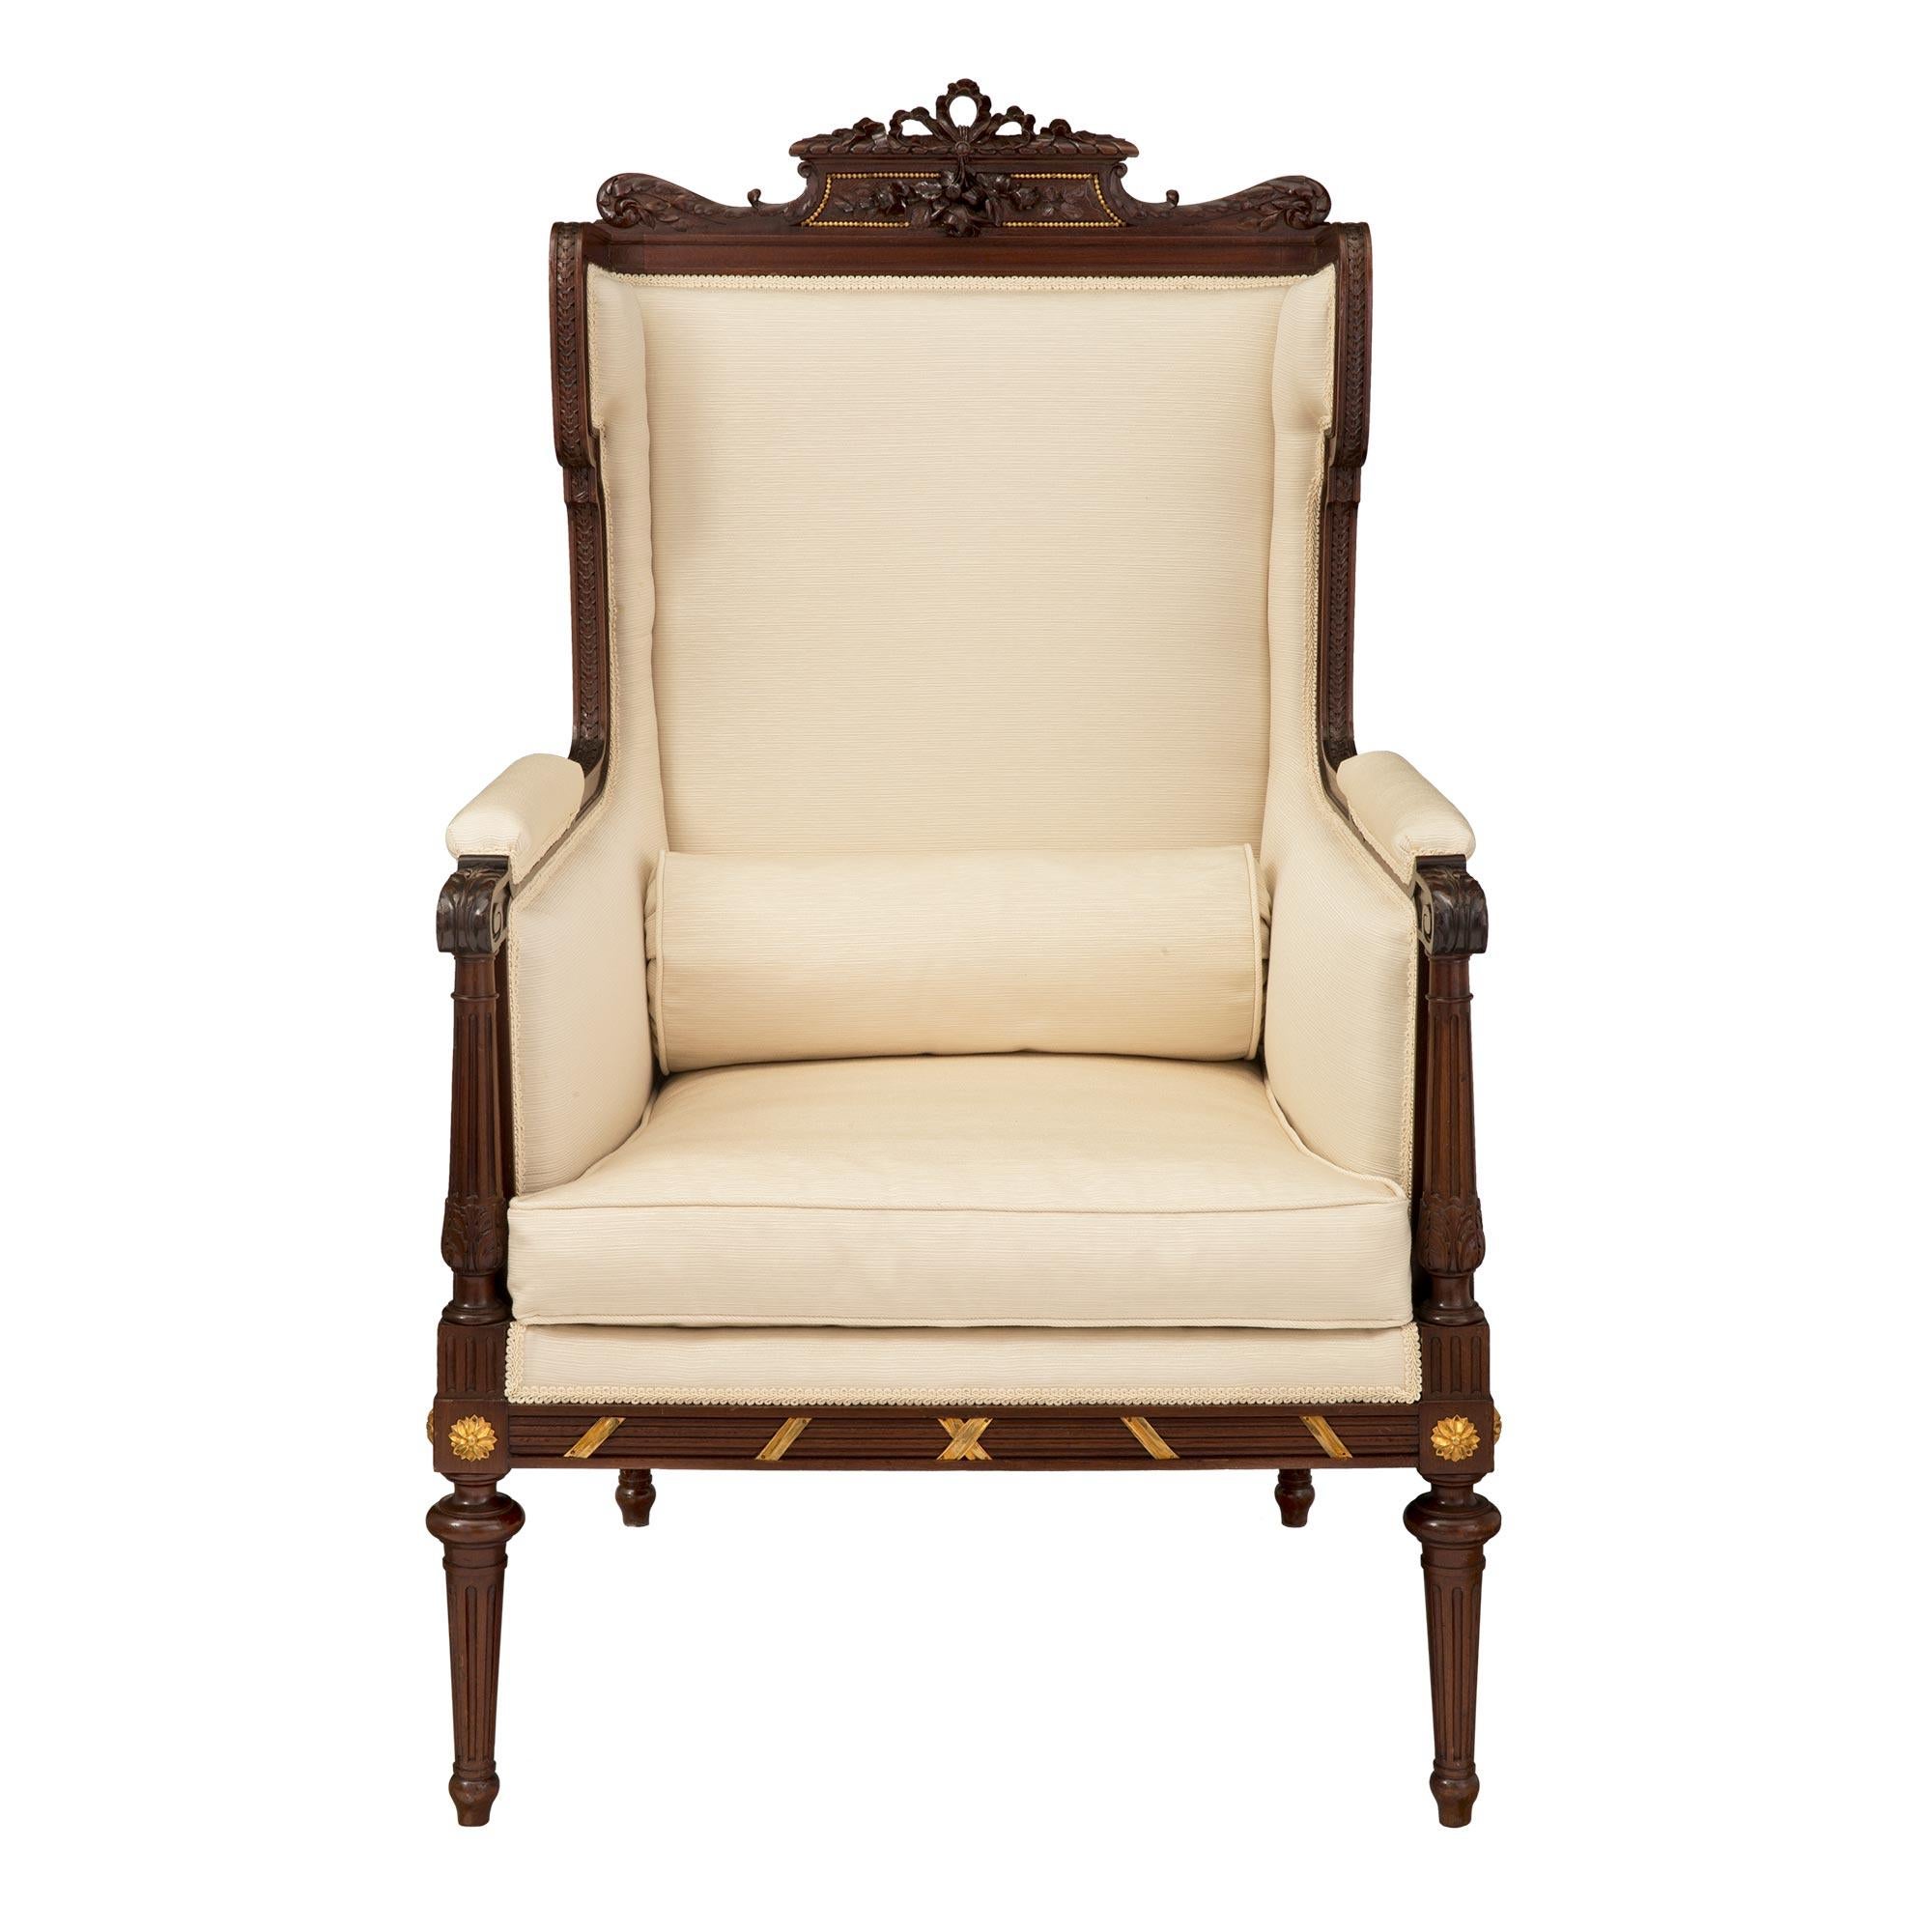 A most attractive French late 19th century Louis XVI st. Mahogany and ormolu mounted duchesse brisee, signed Jansen, Paris. The three piece lady's armchair is raised by tapered fluted legs below a moulded frieze. The frieze is adorned with an ormolu